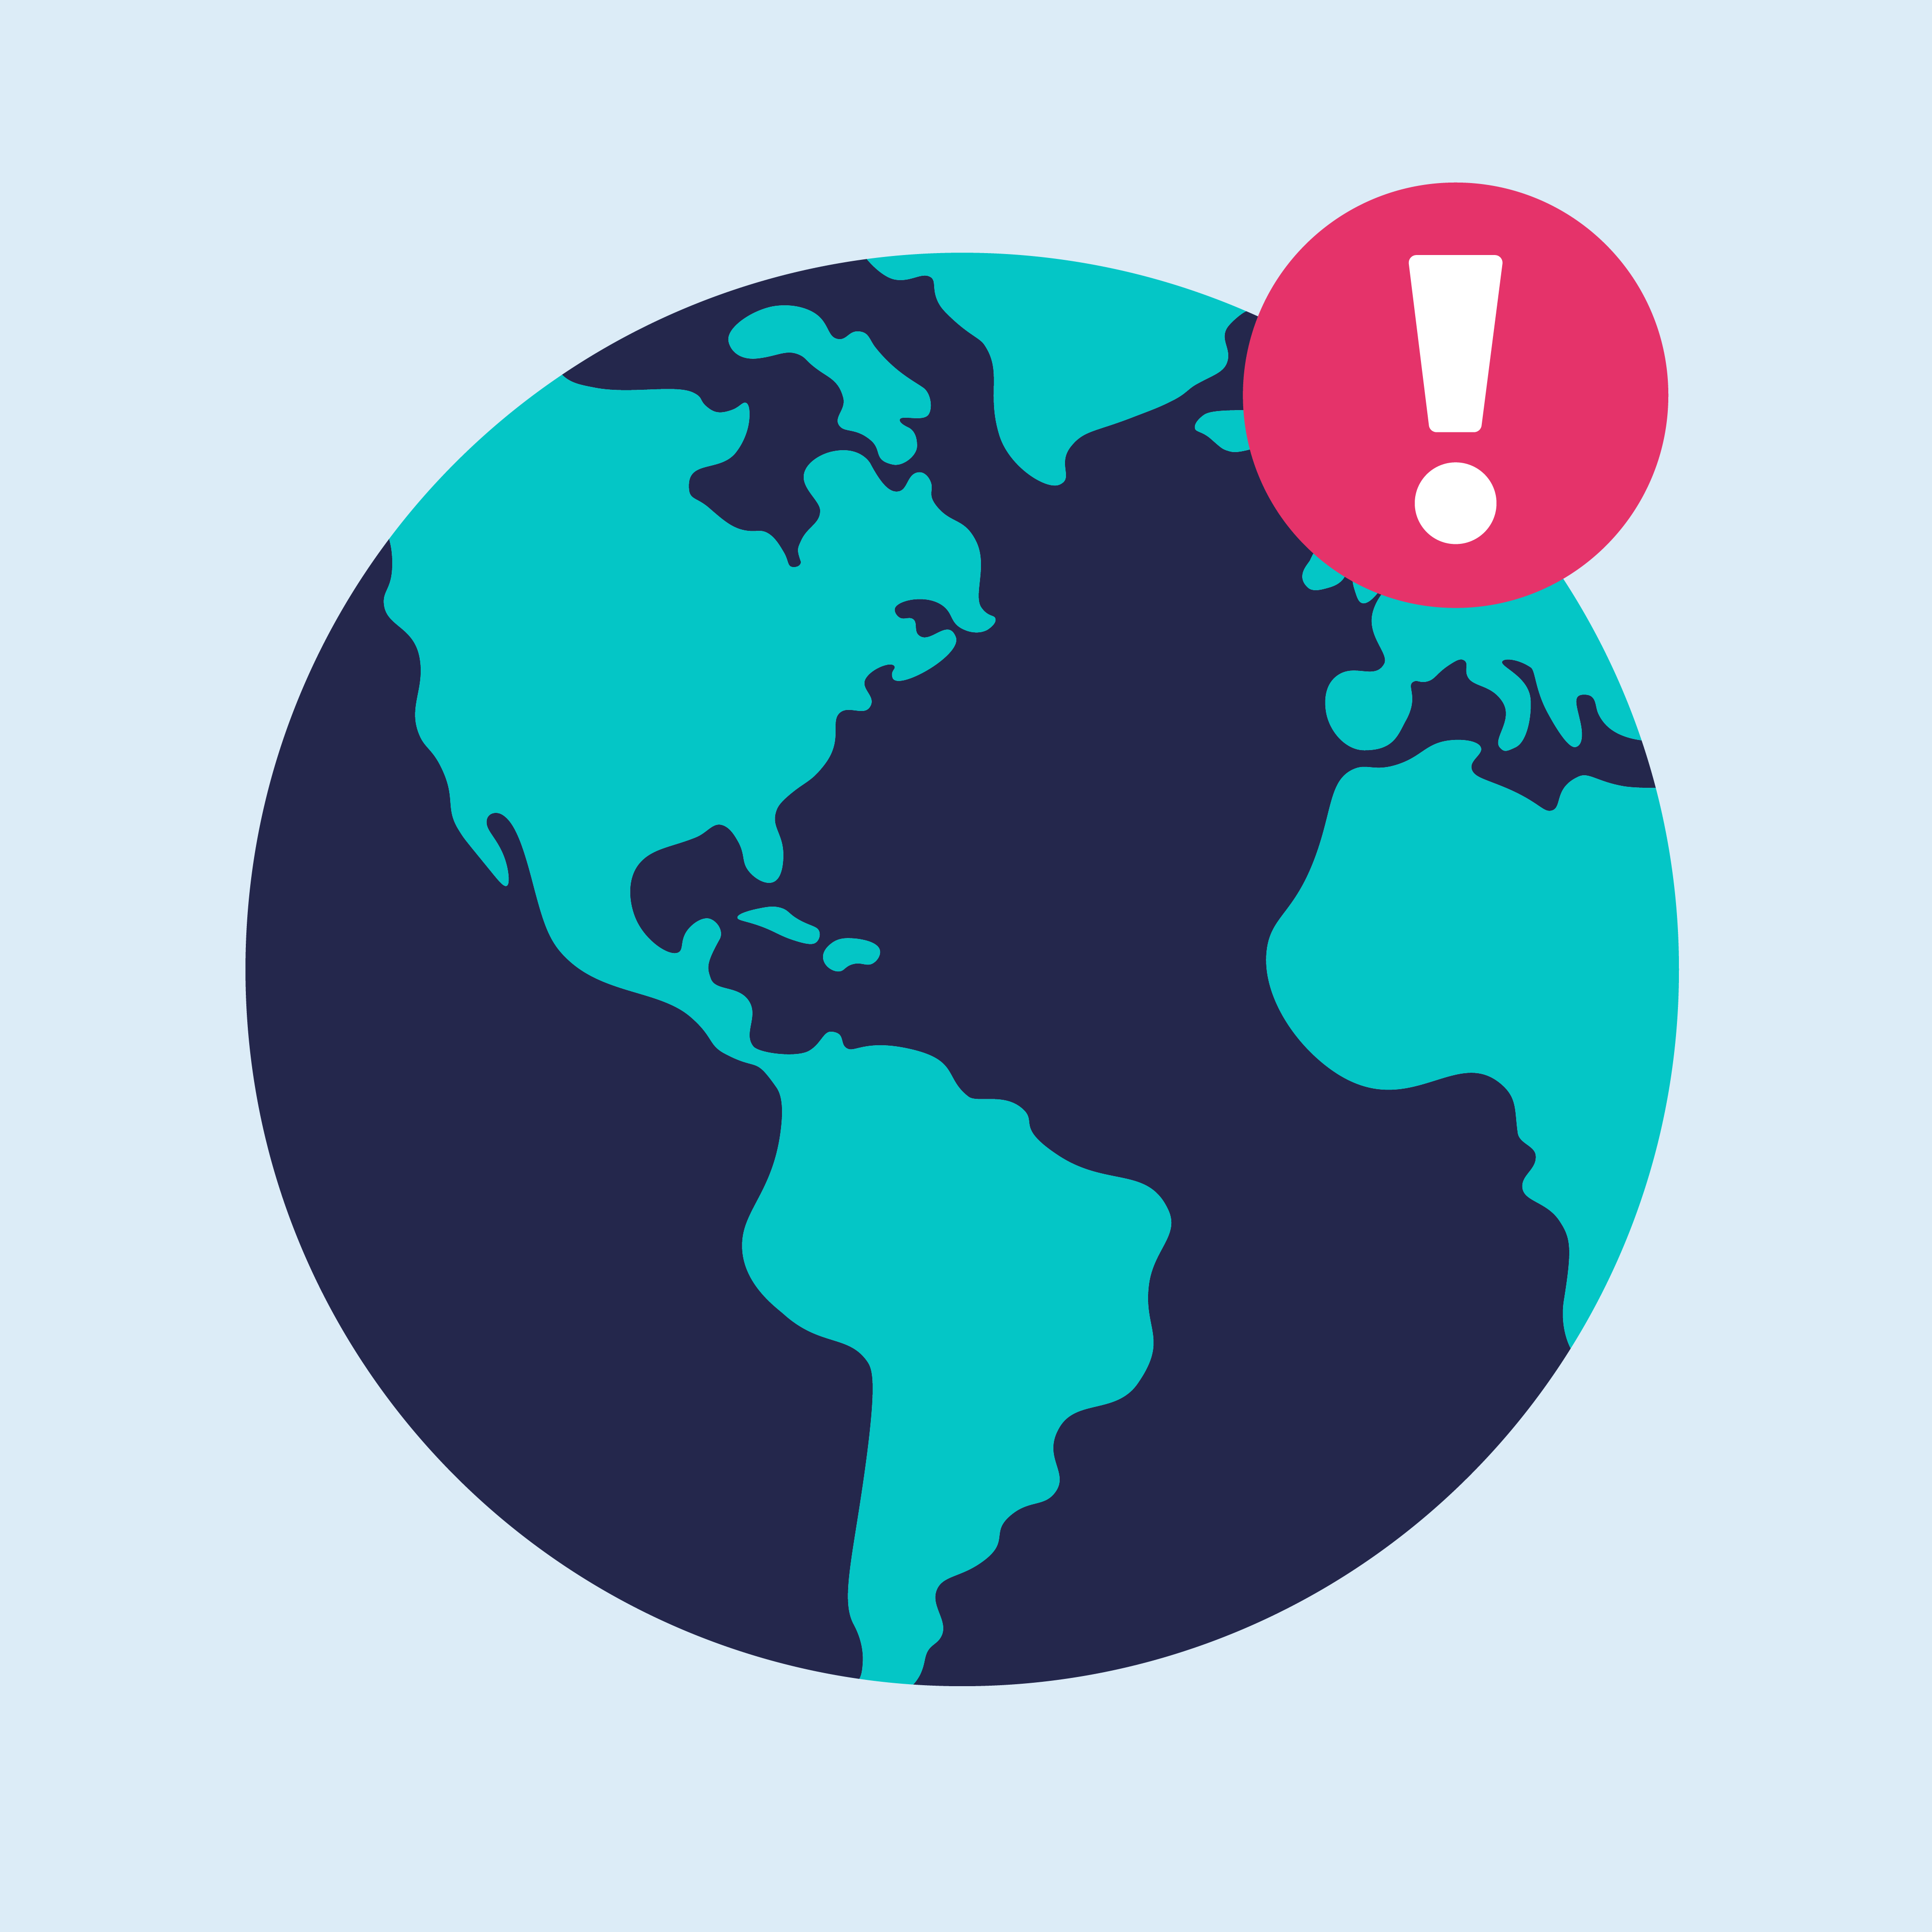 Minimalist vector art illustration of the Earth with an exclamation mark notification icon by digital artist Baz Grafton.